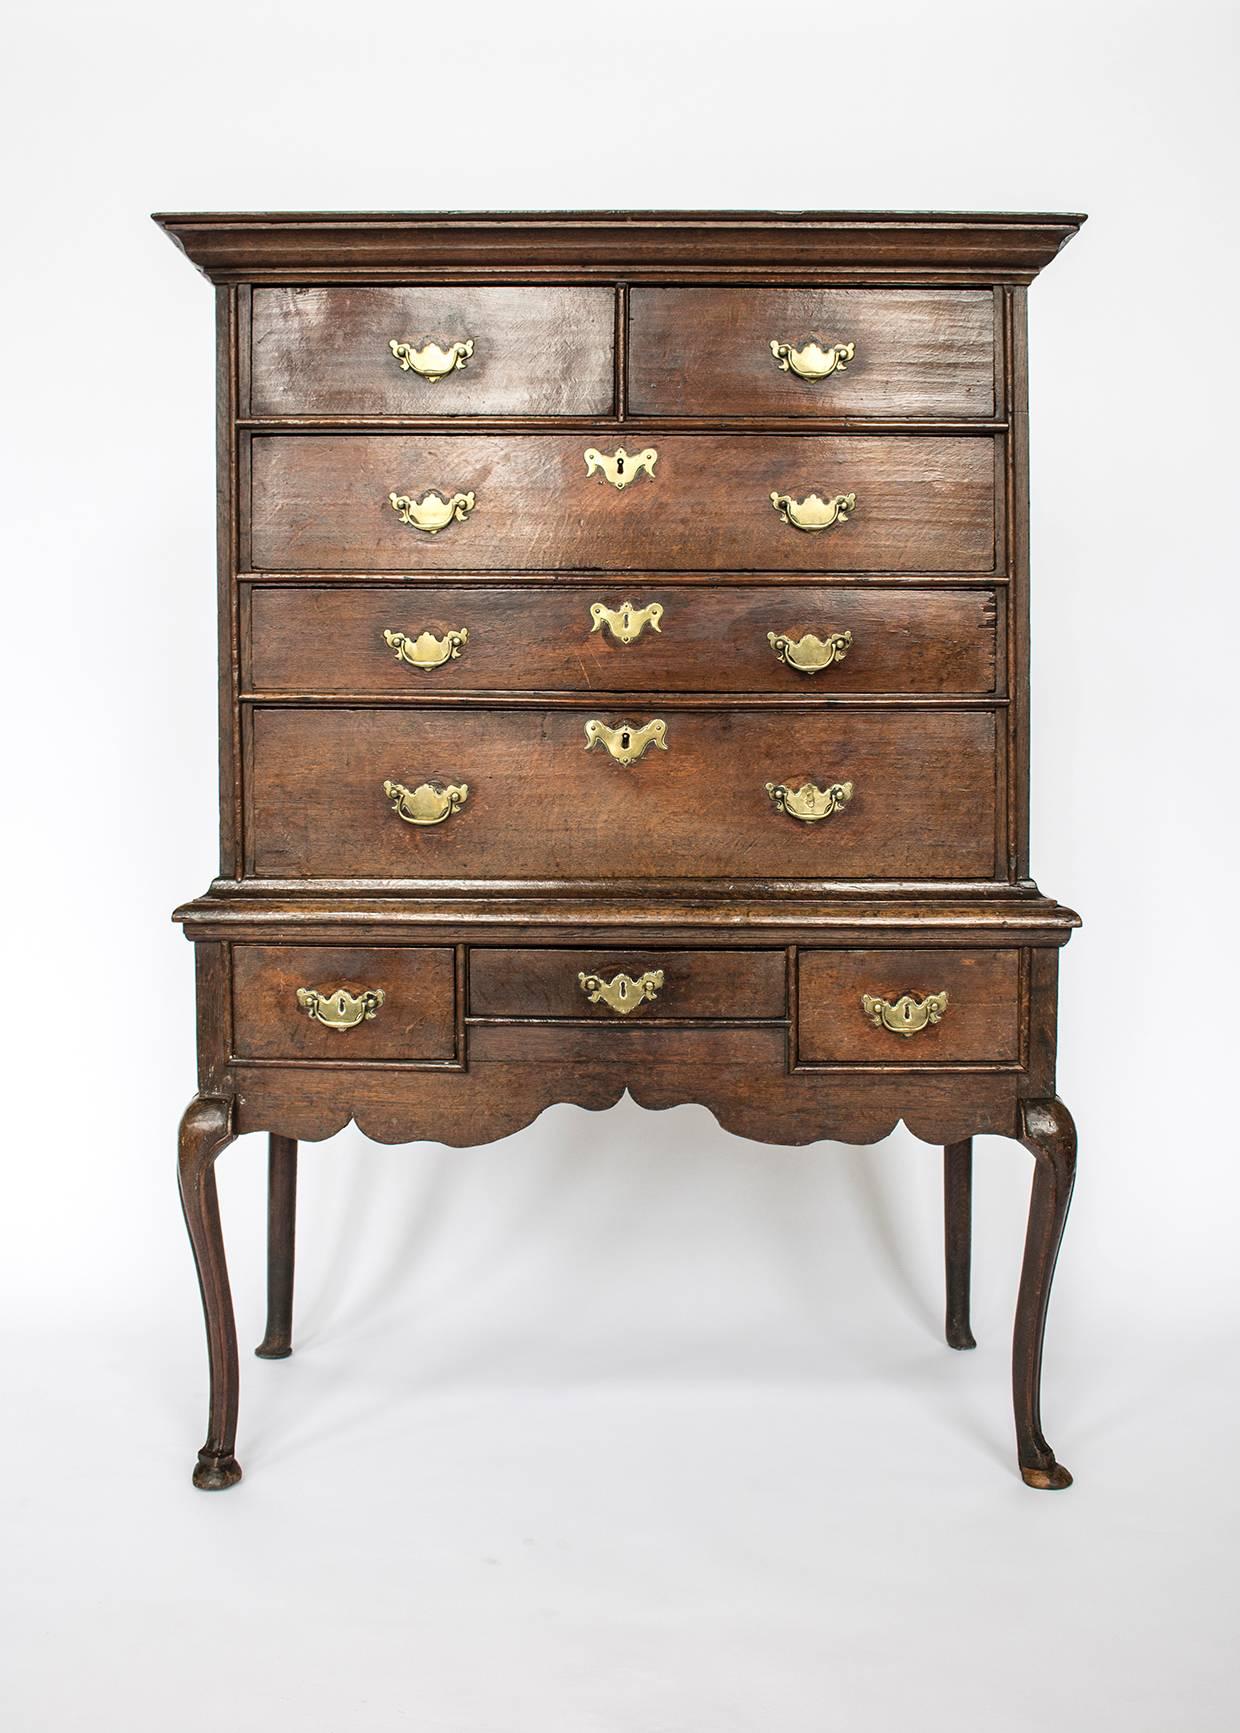 Lovely oak chest on stand featuring brass handles and Queen Anne style cabriole legs. 

Condition is fair with some notes; replacement handles, some old repairs, some old worm holes, bail missing from stand central drawer.